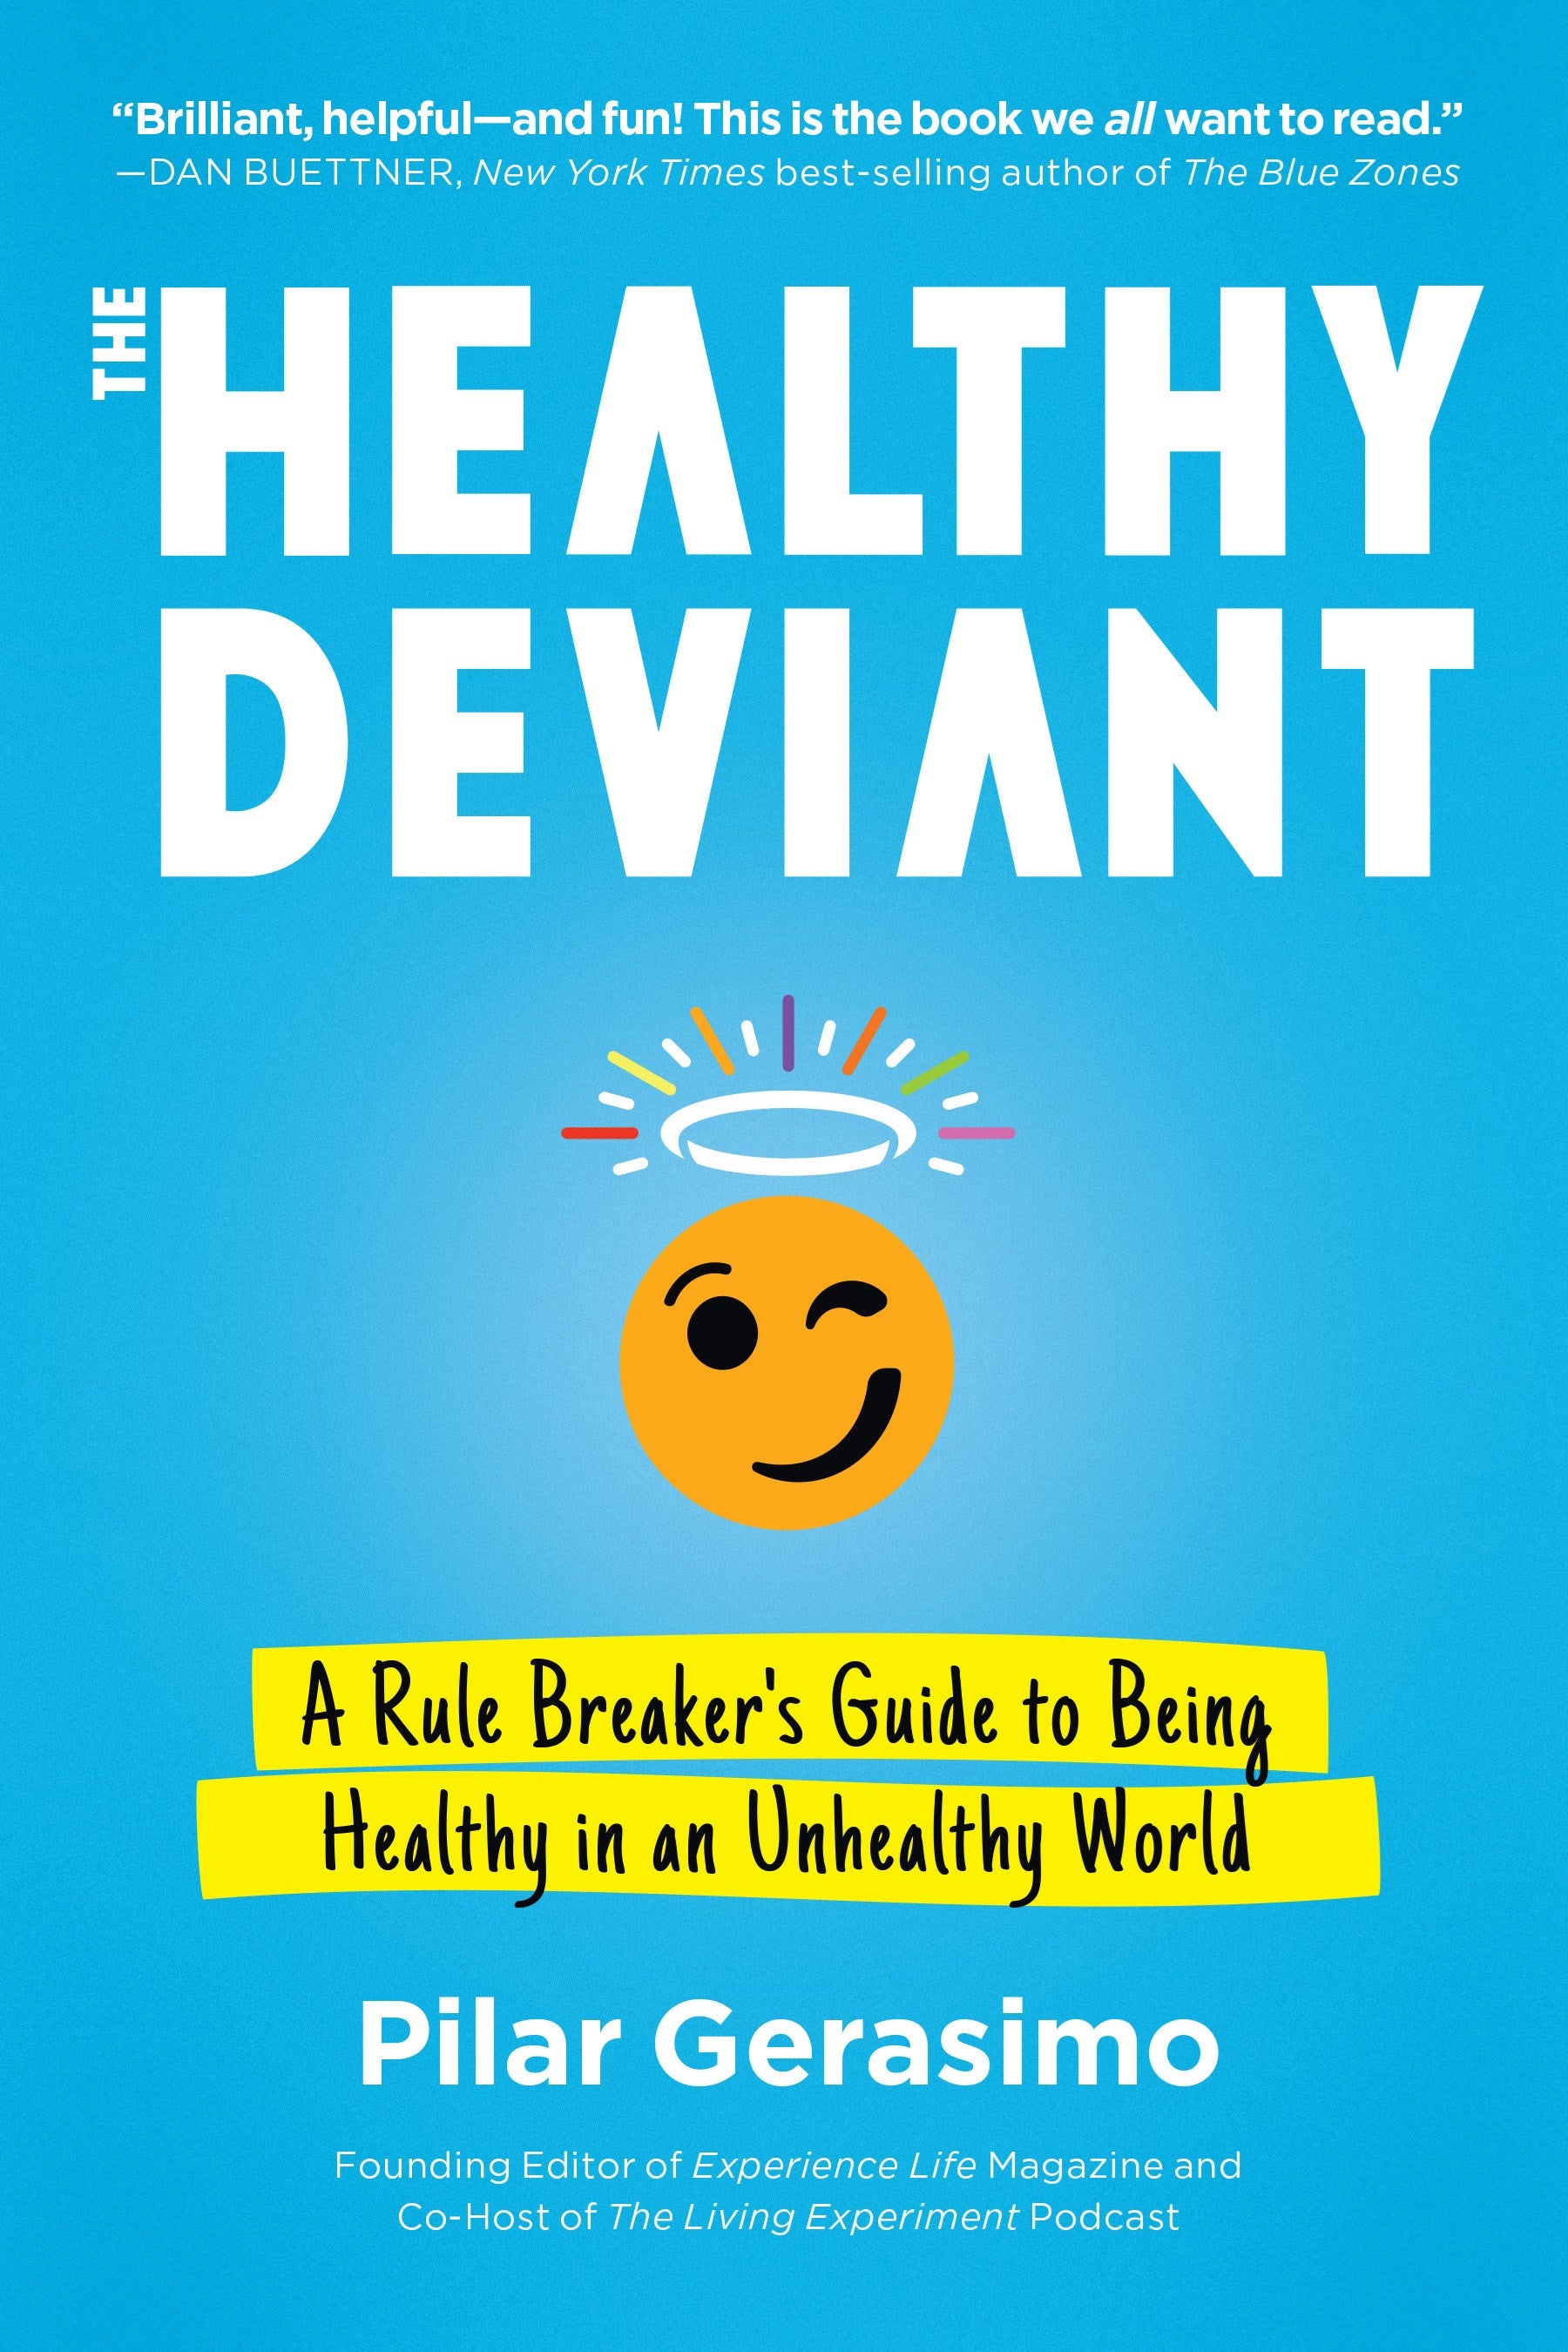 The Healthy Deviant: A Rule Breaker's Guide to Being Healthy in an Unhealthy World